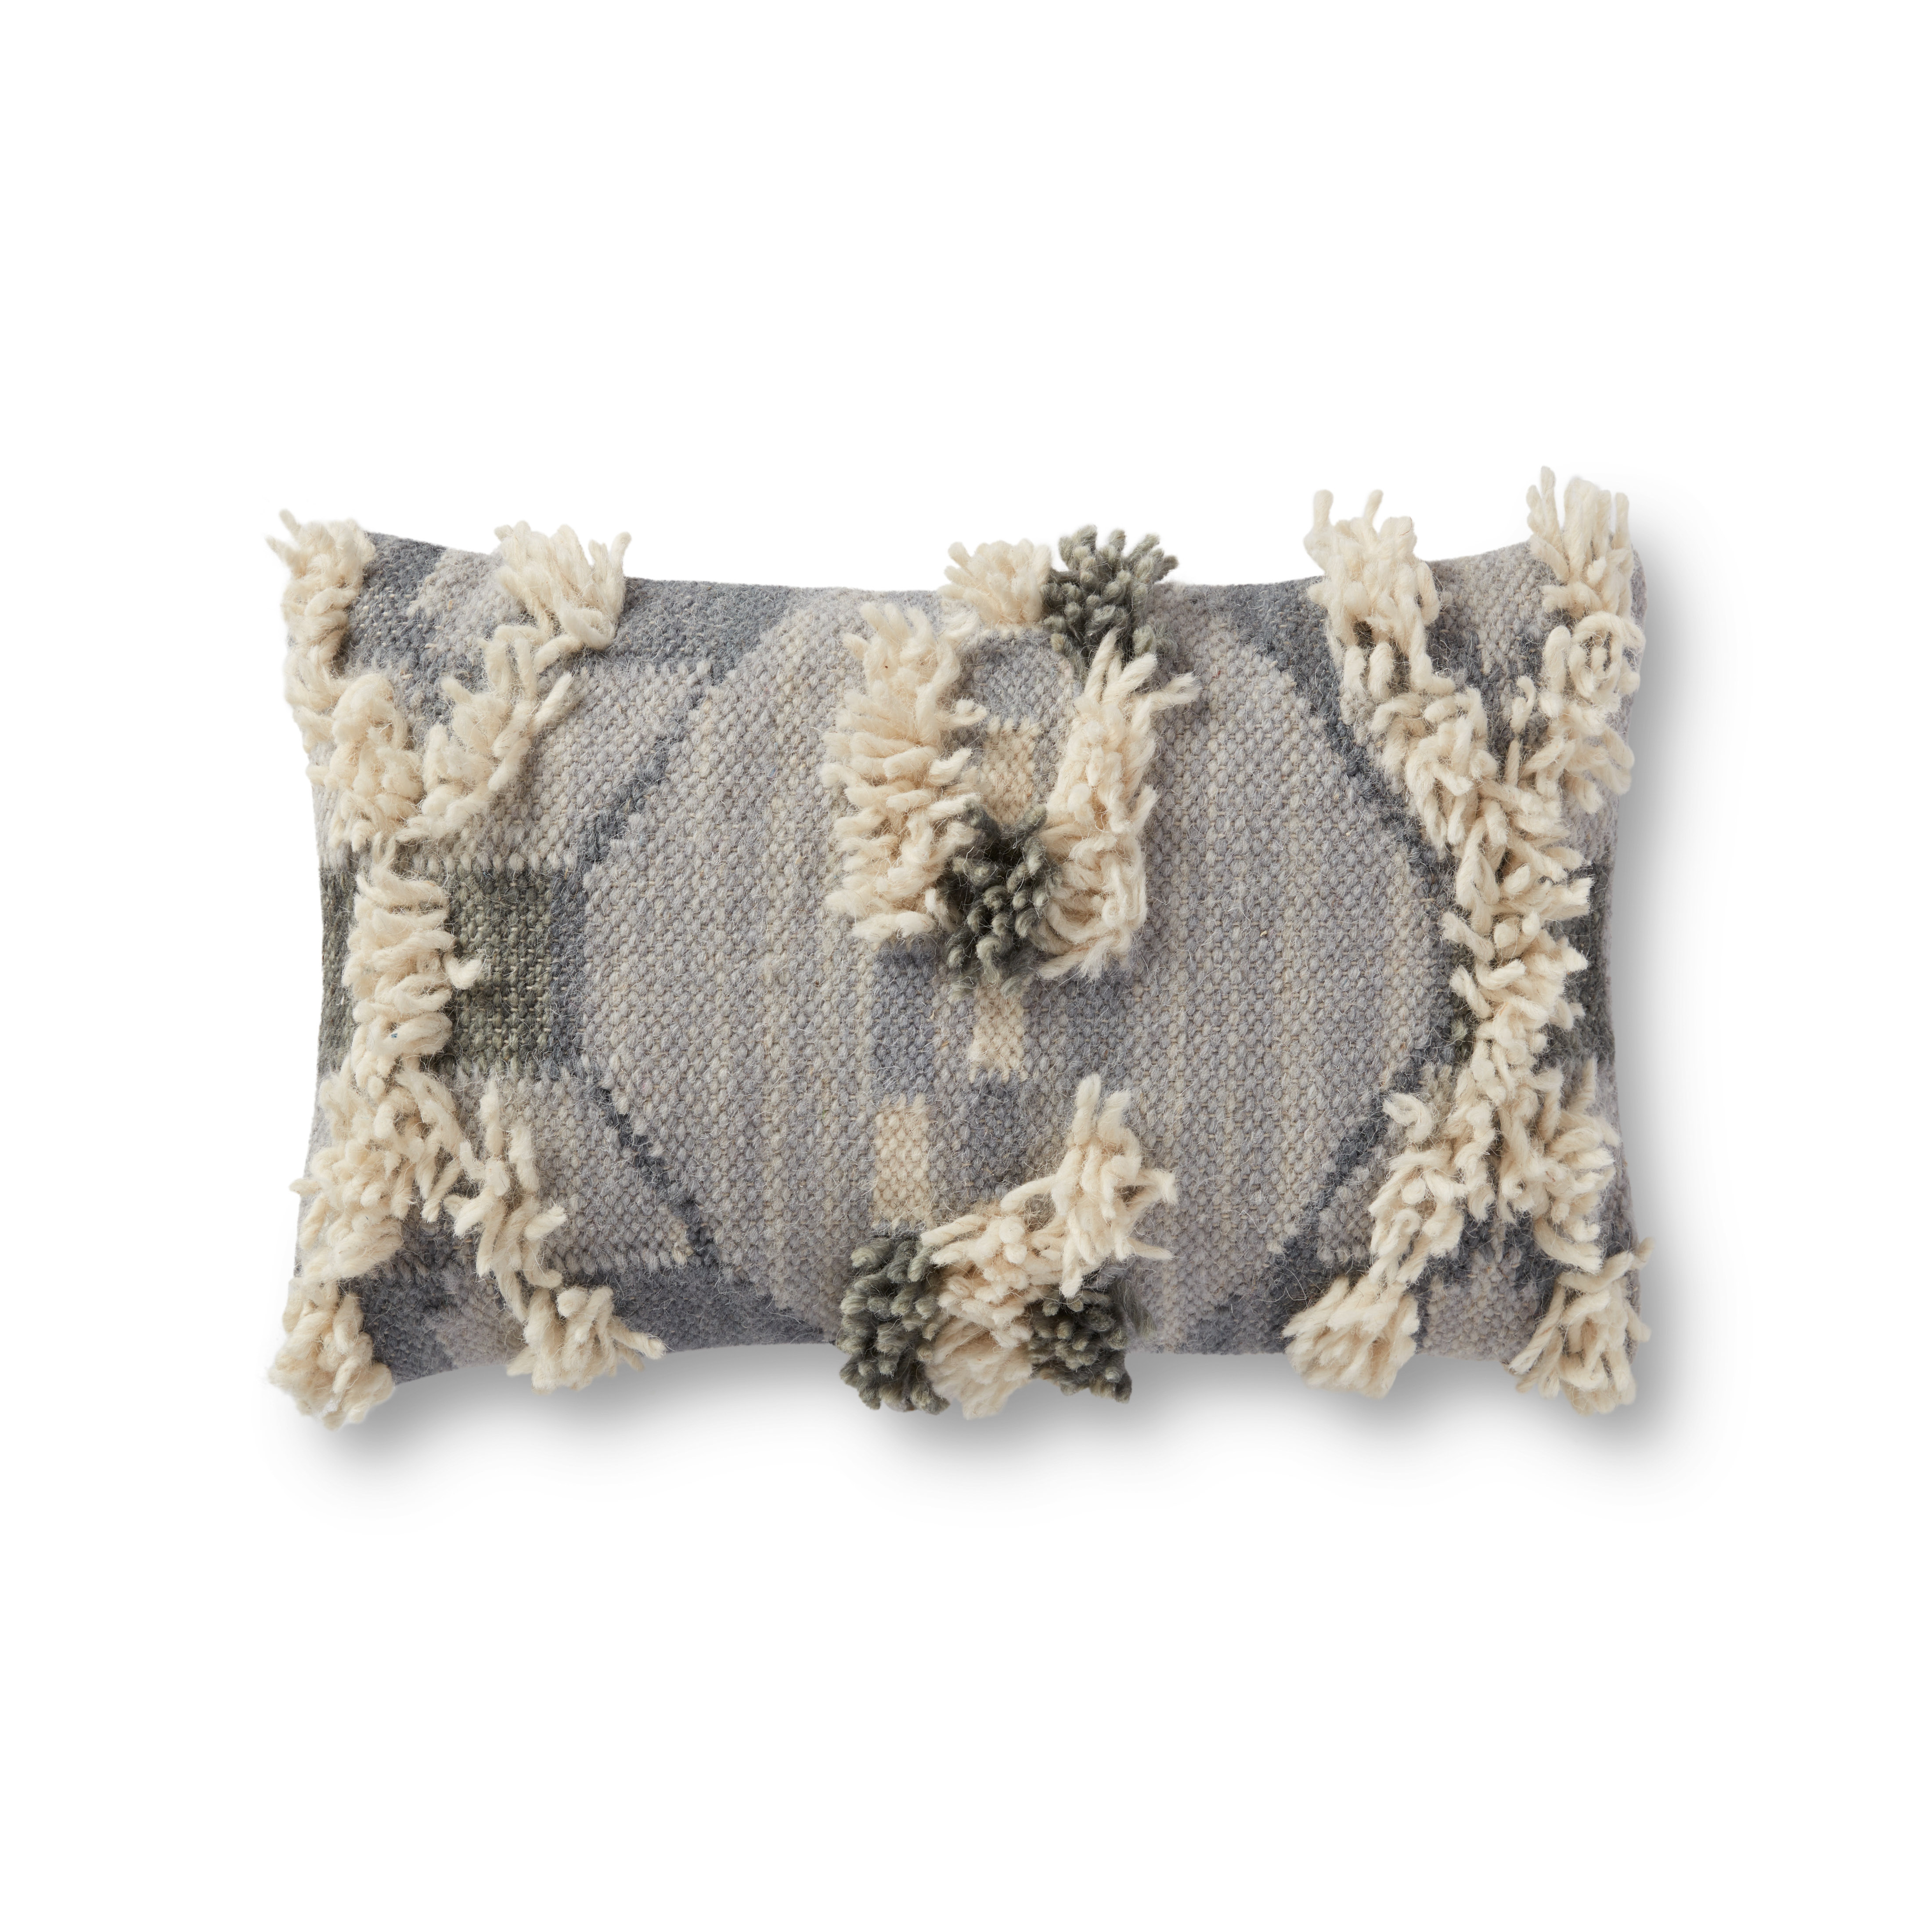 PILLOWS P4149 GREY / MULTI 13" x 21" Cover w/Poly - ED Ellen DeGeneres Crafted by Loloi Rugs